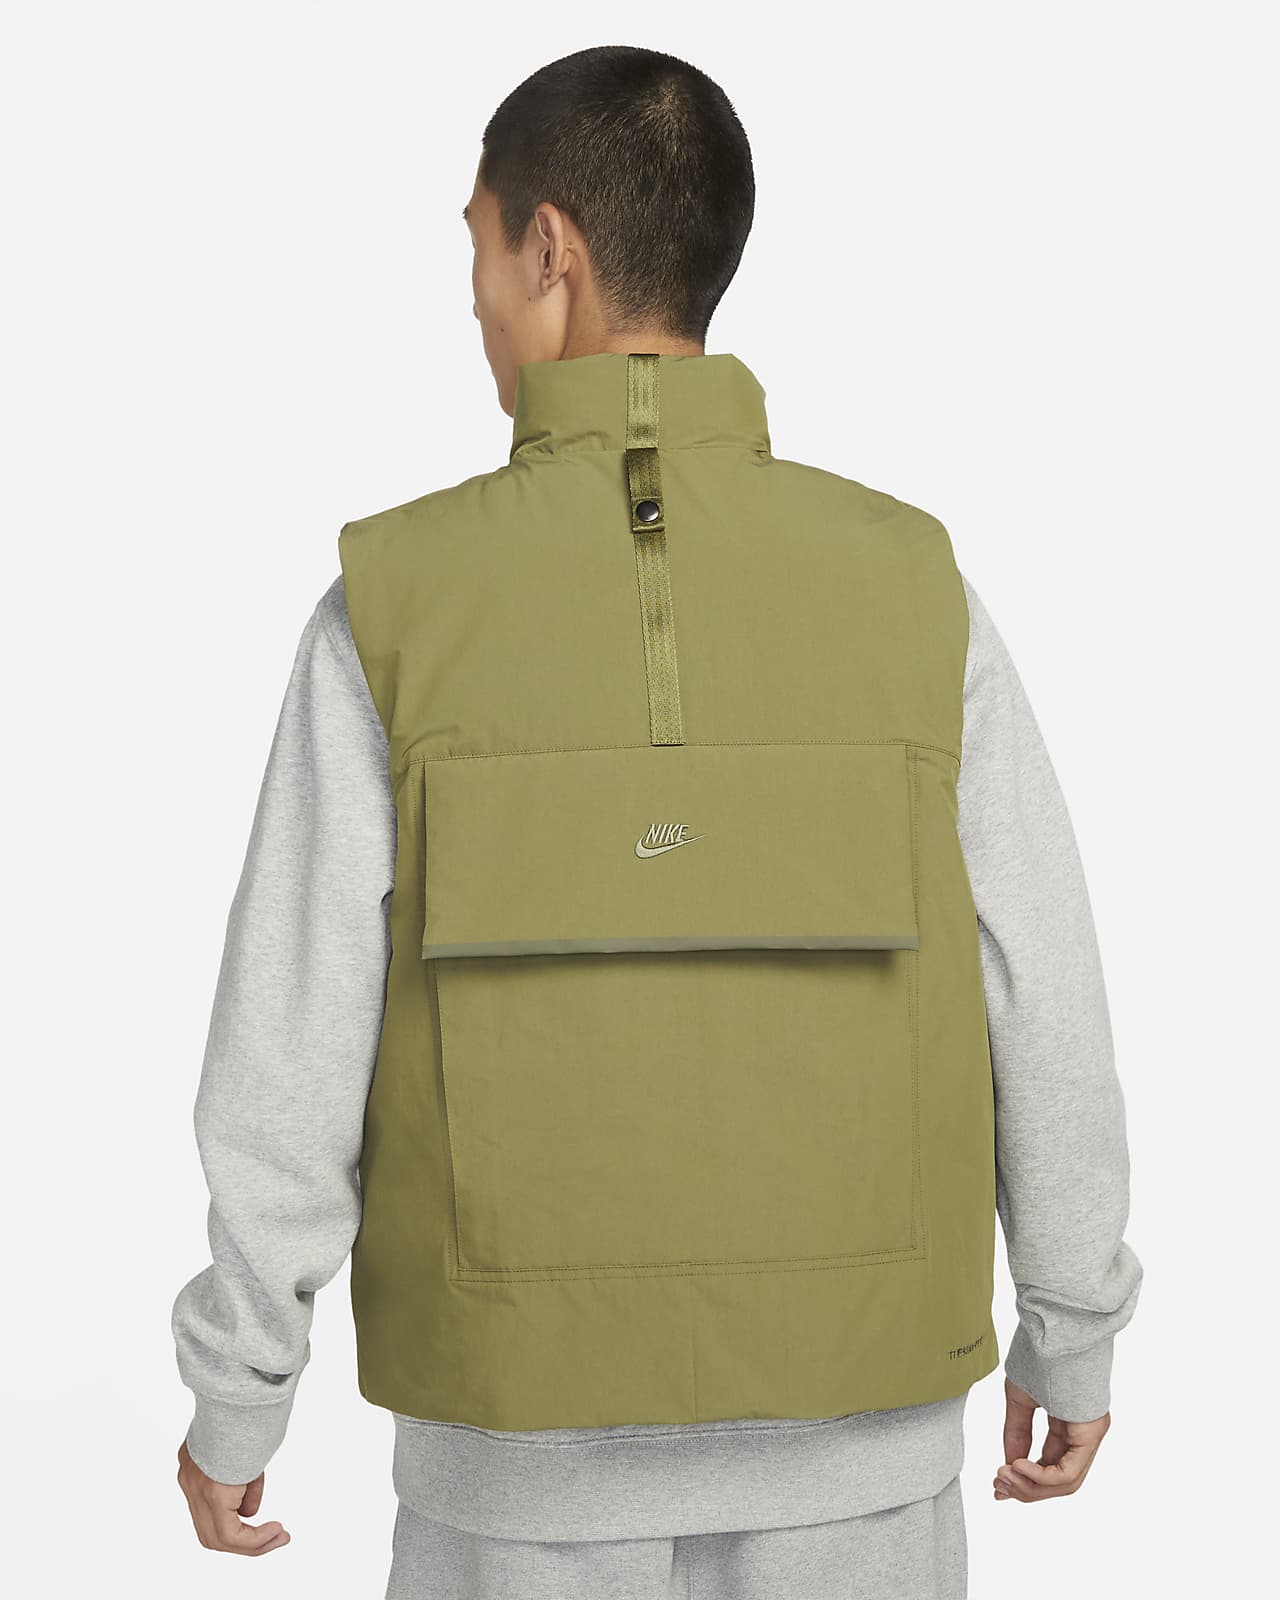 Nike Sportswear Therma-FIT Tech Pack Men's Insulated Vest